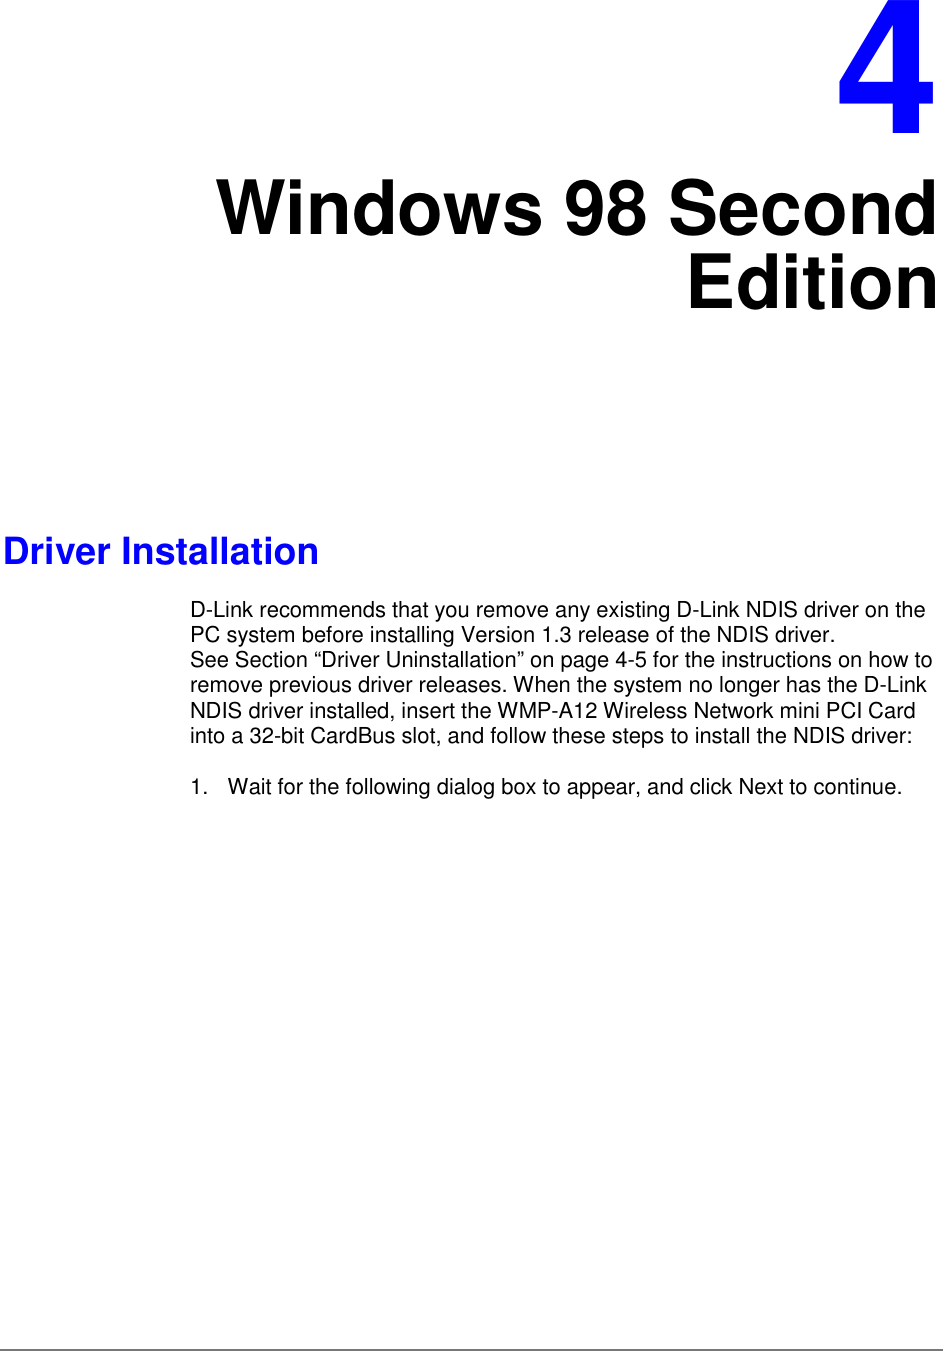 4Windows 98 SecondEditionDriver InstallationD-Link recommends that you remove any existing D-Link NDIS driver on thePC system before installing Version 1.3 release of the NDIS driver.See Section “Driver Uninstallation” on page 4-5 for the instructions on how toremove previous driver releases. When the system no longer has the D-LinkNDIS driver installed, insert the WMP-A12 Wireless Network mini PCI Cardinto a 32-bit CardBus slot, and follow these steps to install the NDIS driver:1.  Wait for the following dialog box to appear, and click Next to continue.